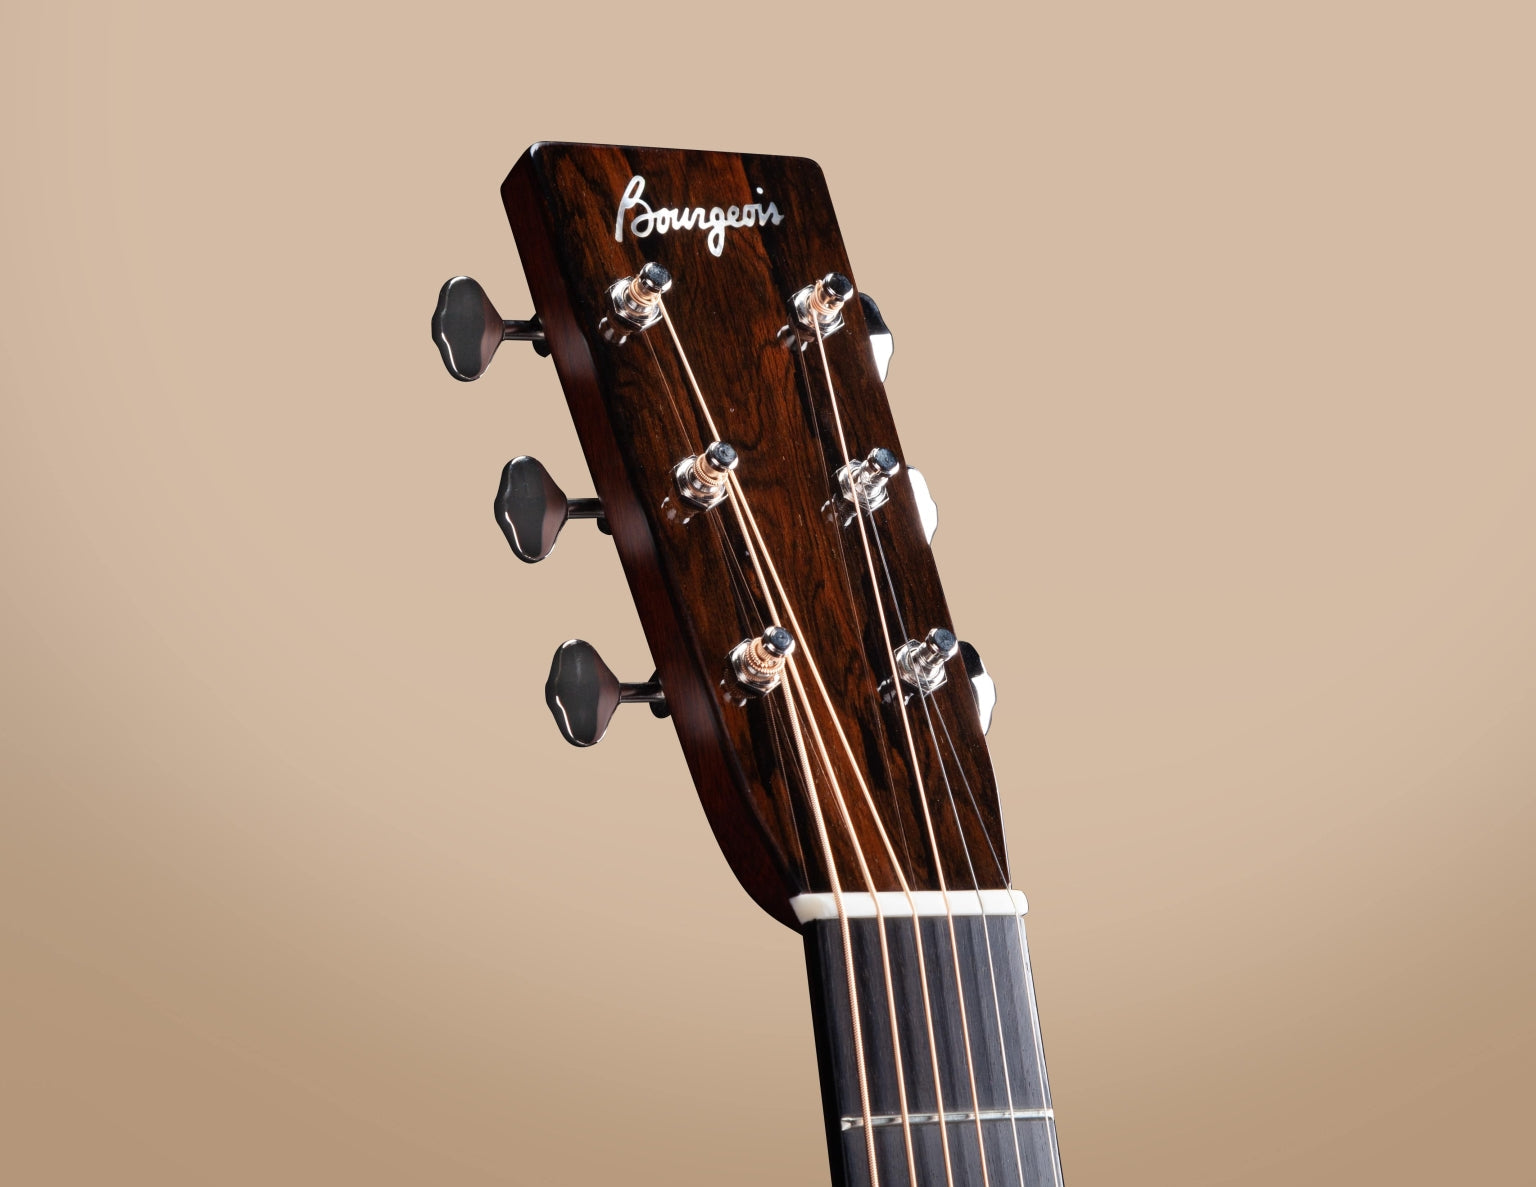 Bourgeois Touchstone Vintage OMV/TS OM Acoustic Guitar, Acoustic Guitar for sale at Richards Guitars.